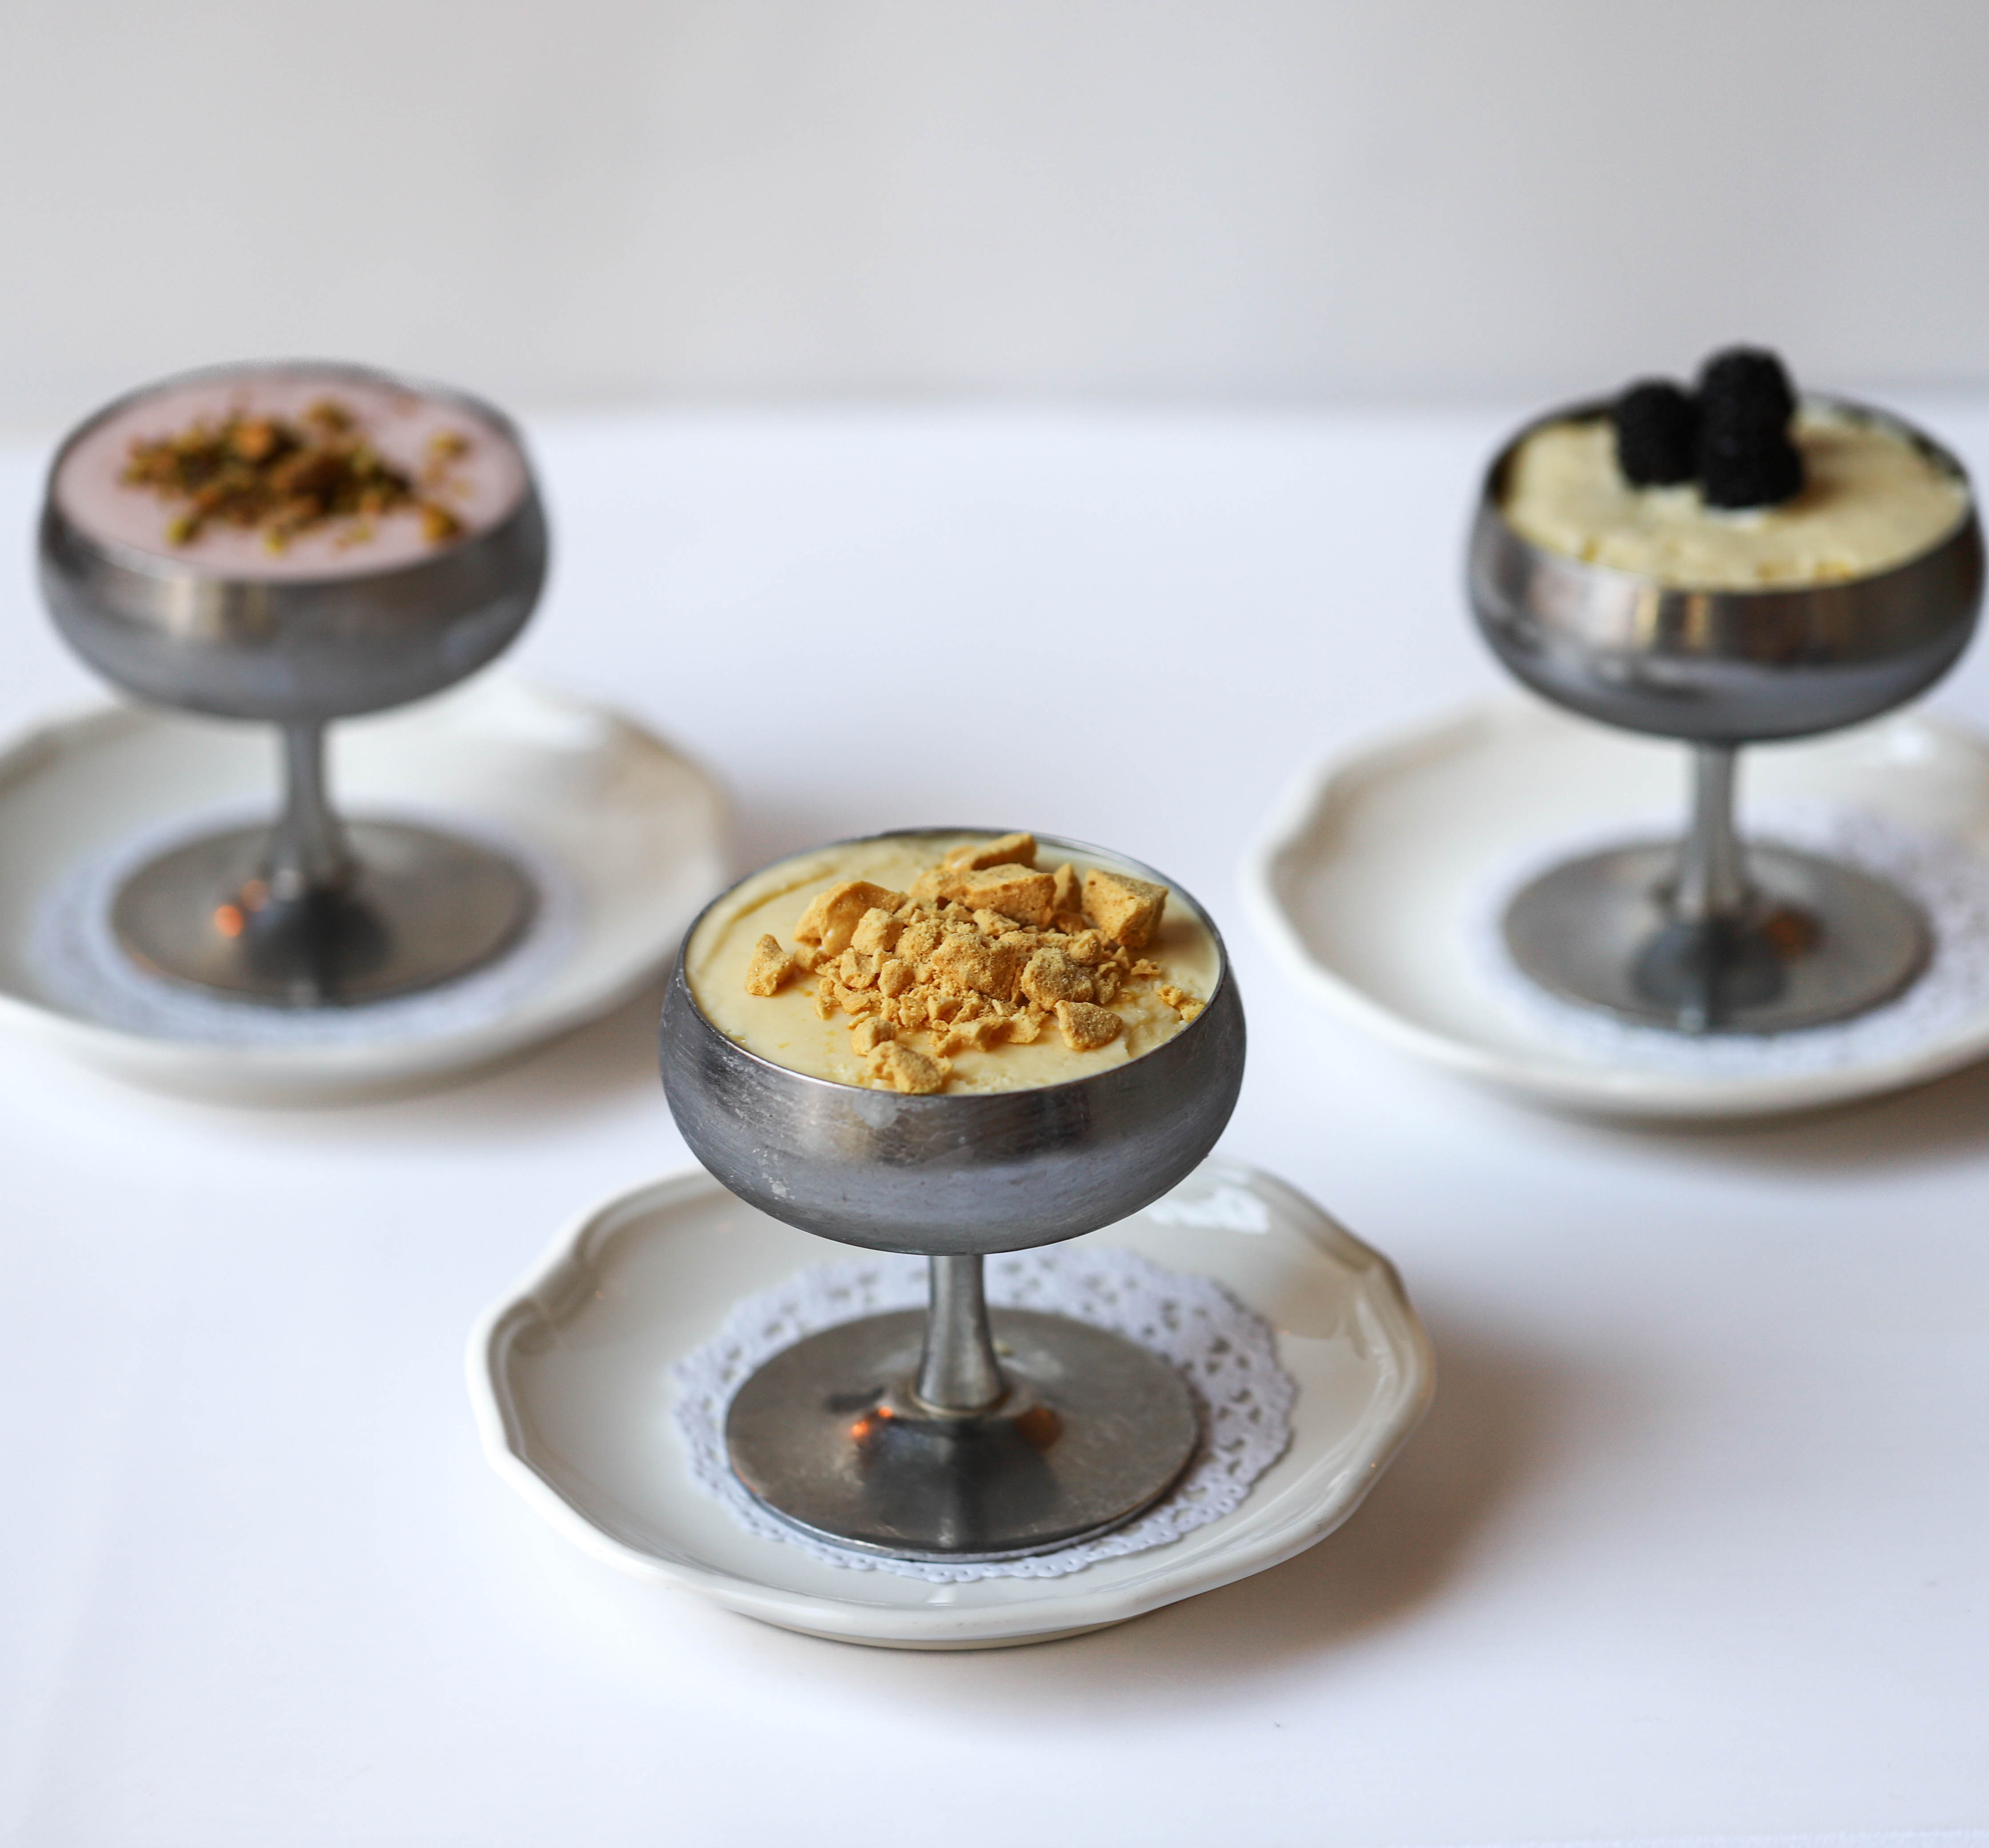 three metal coupe glasses of ice cream sit on top of doilies on classic ceramic plates on a white counter in front of a white background